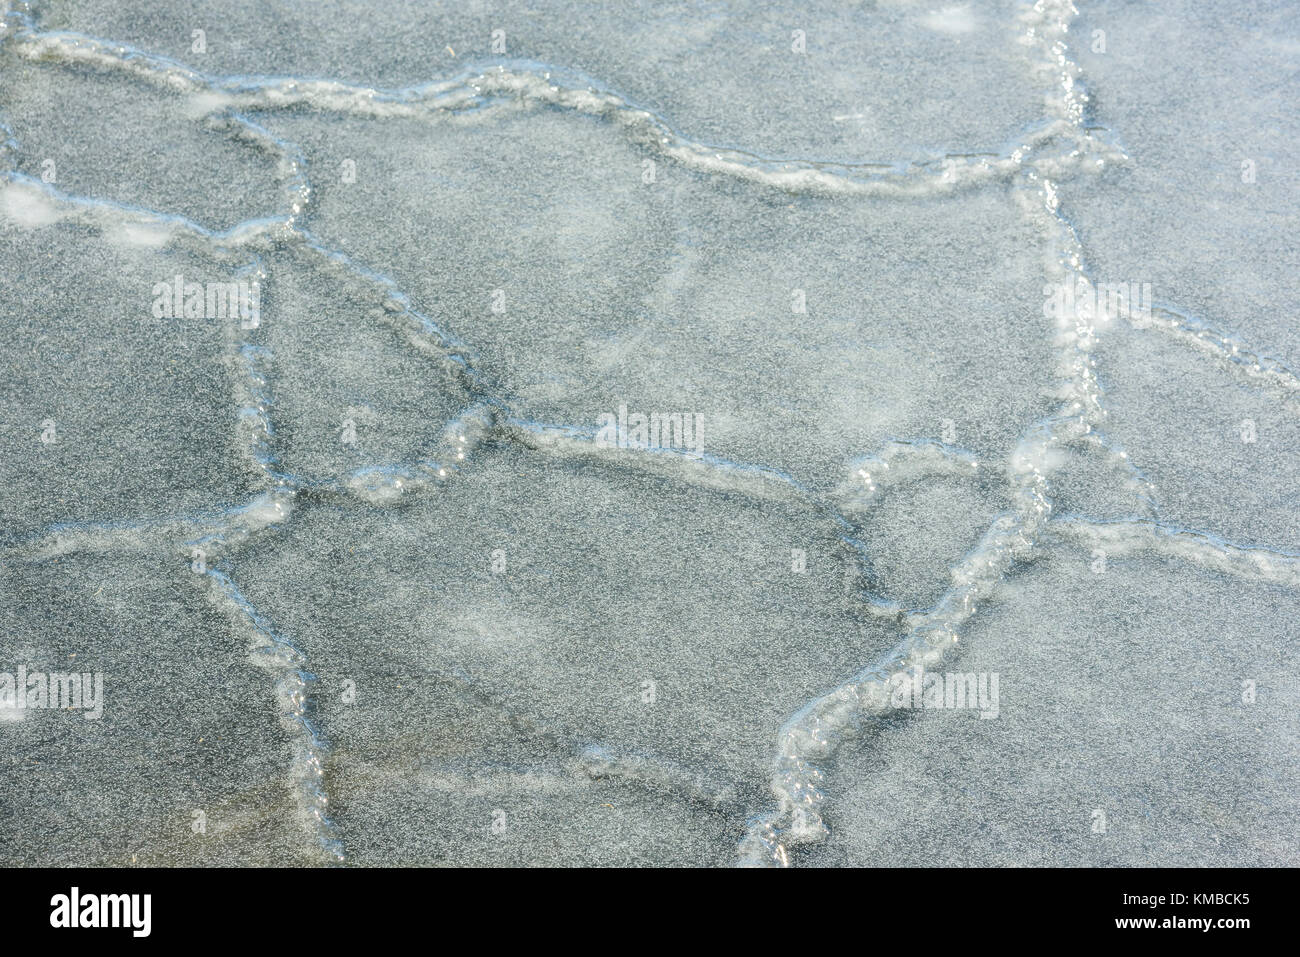 Broken up ice sheets have refrozen and formed a larger slab of ice making a pattern with seams and small bubbles. Stock Photo